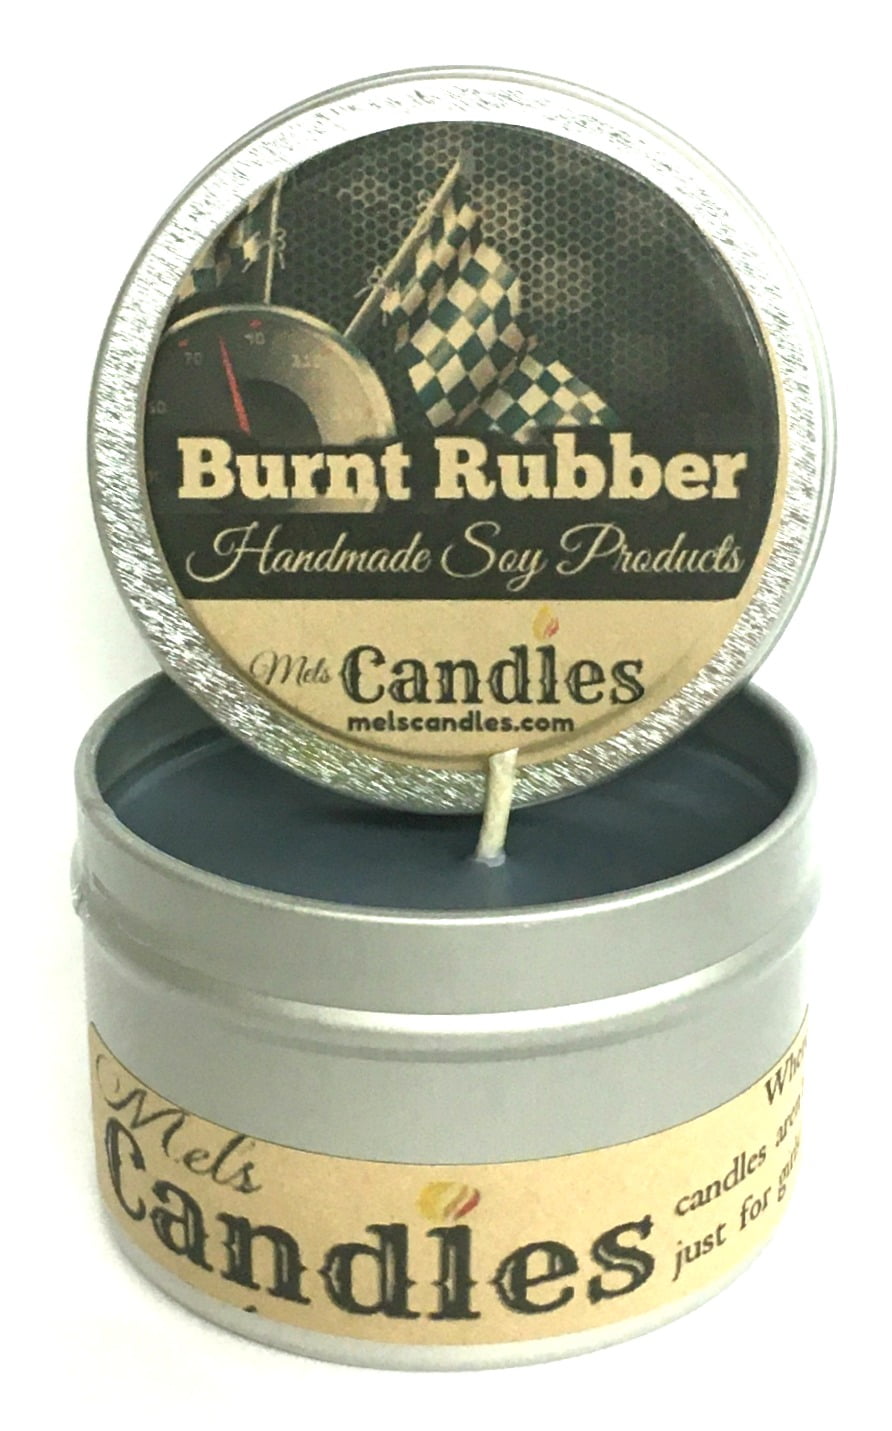 Handmade in USA Burnt Rubber 16 ounce Soy Candle